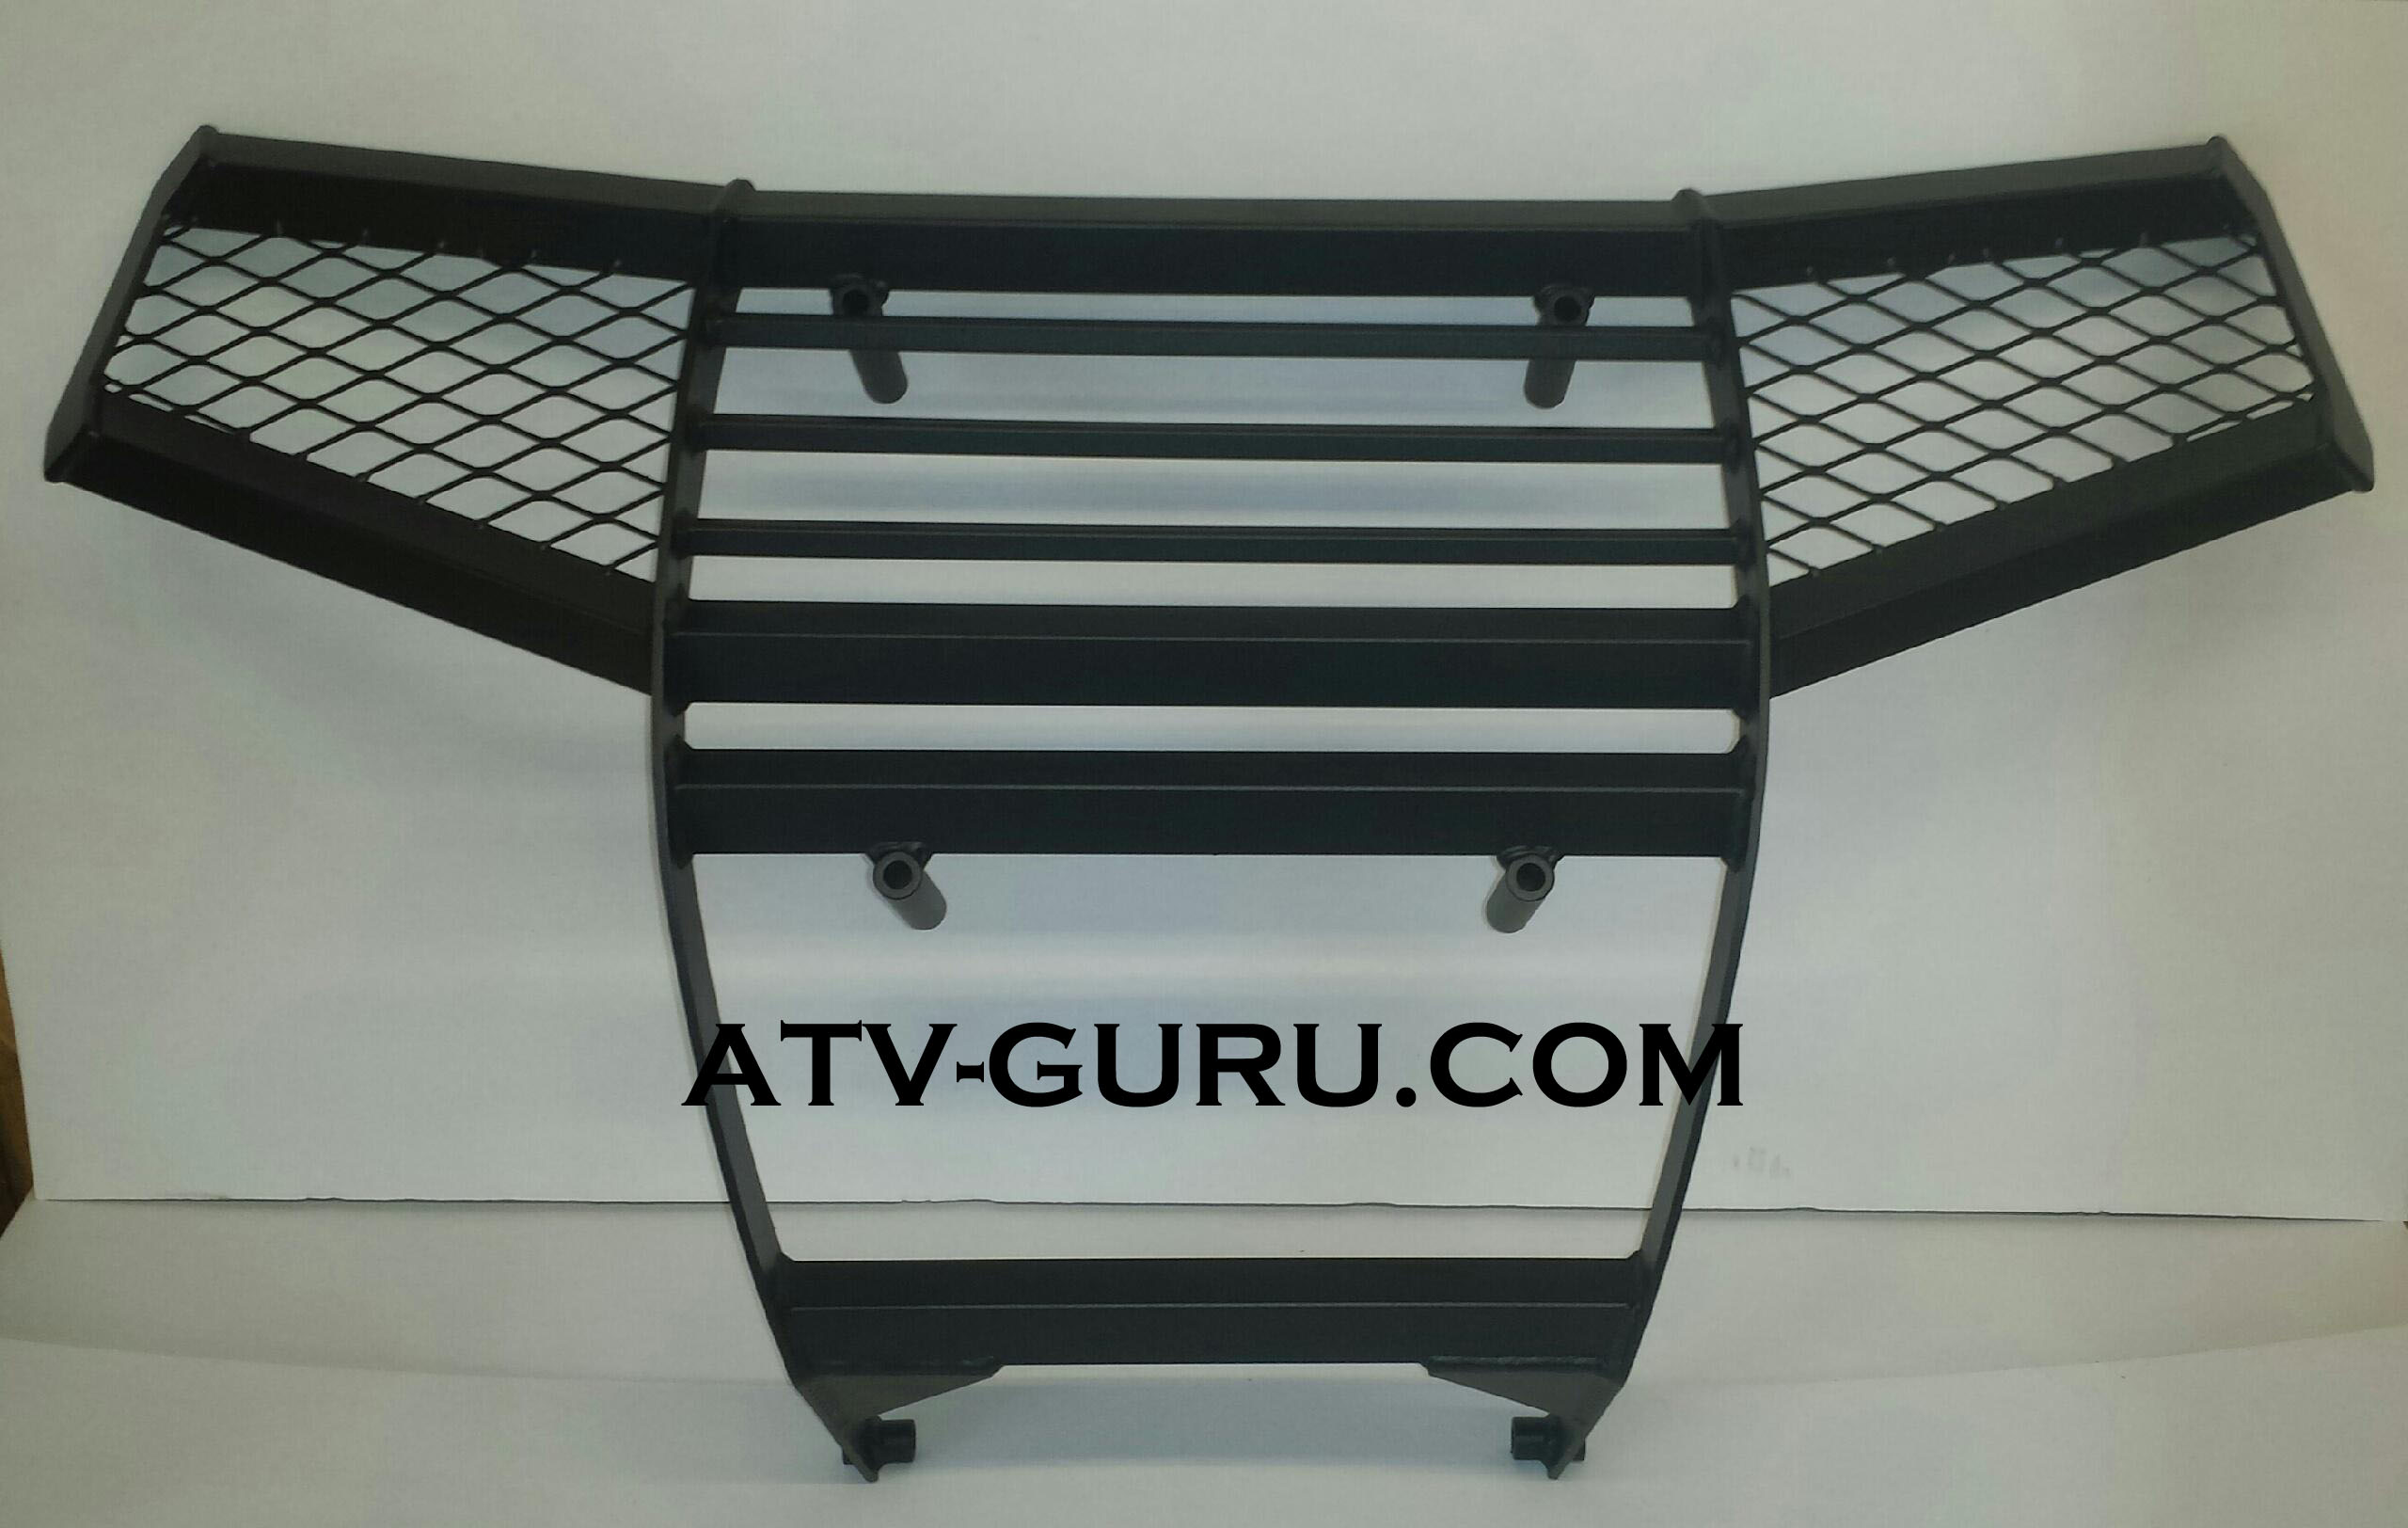 Cobra Front Brush Guard – With center bars and headlight mesh